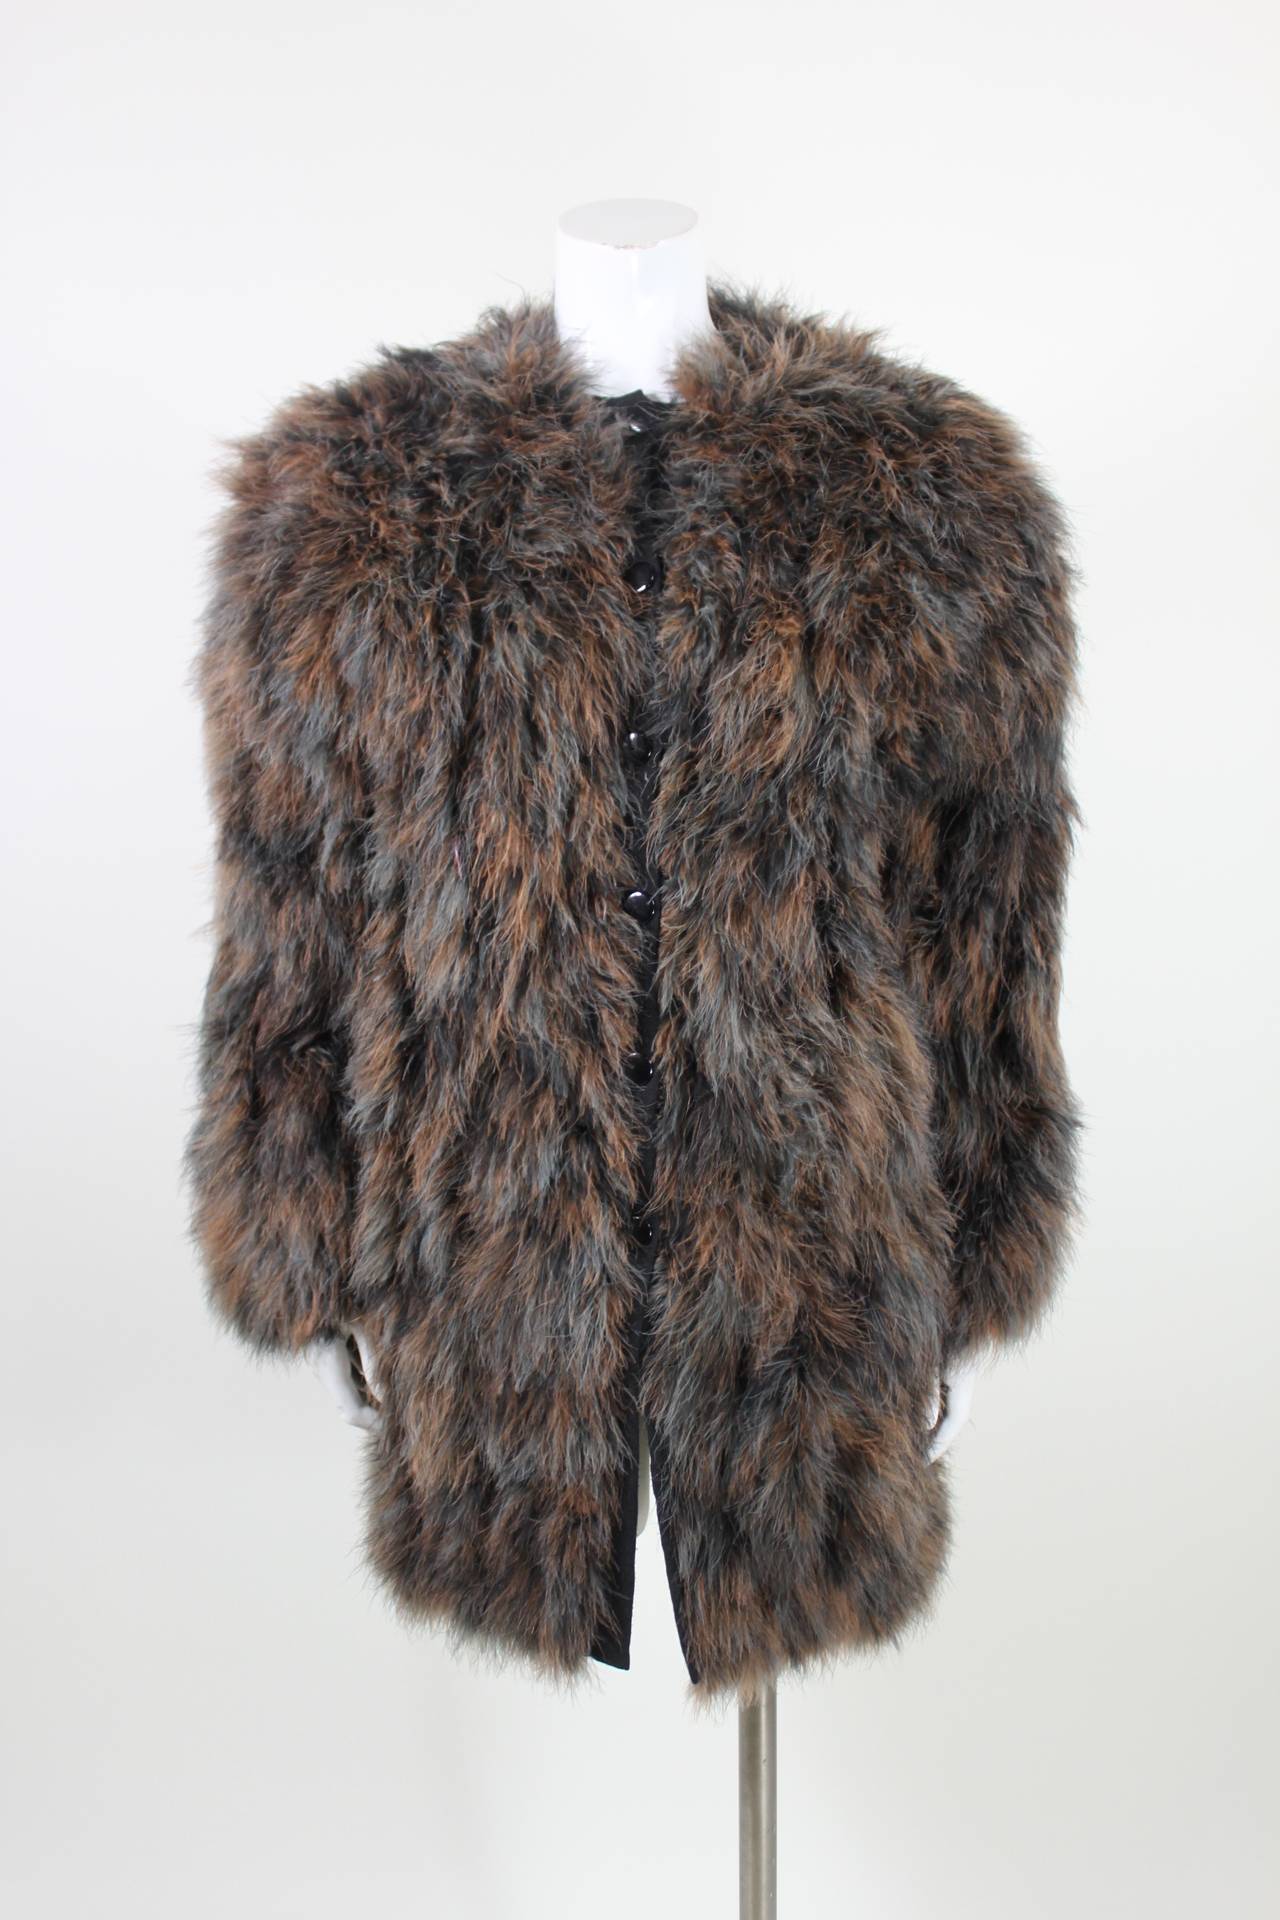 A wonderful marabou jacket featuring a salt-and-pepper color pattern in icy-blue grey and brown. The jacket is fully lined and has a button-front. 
